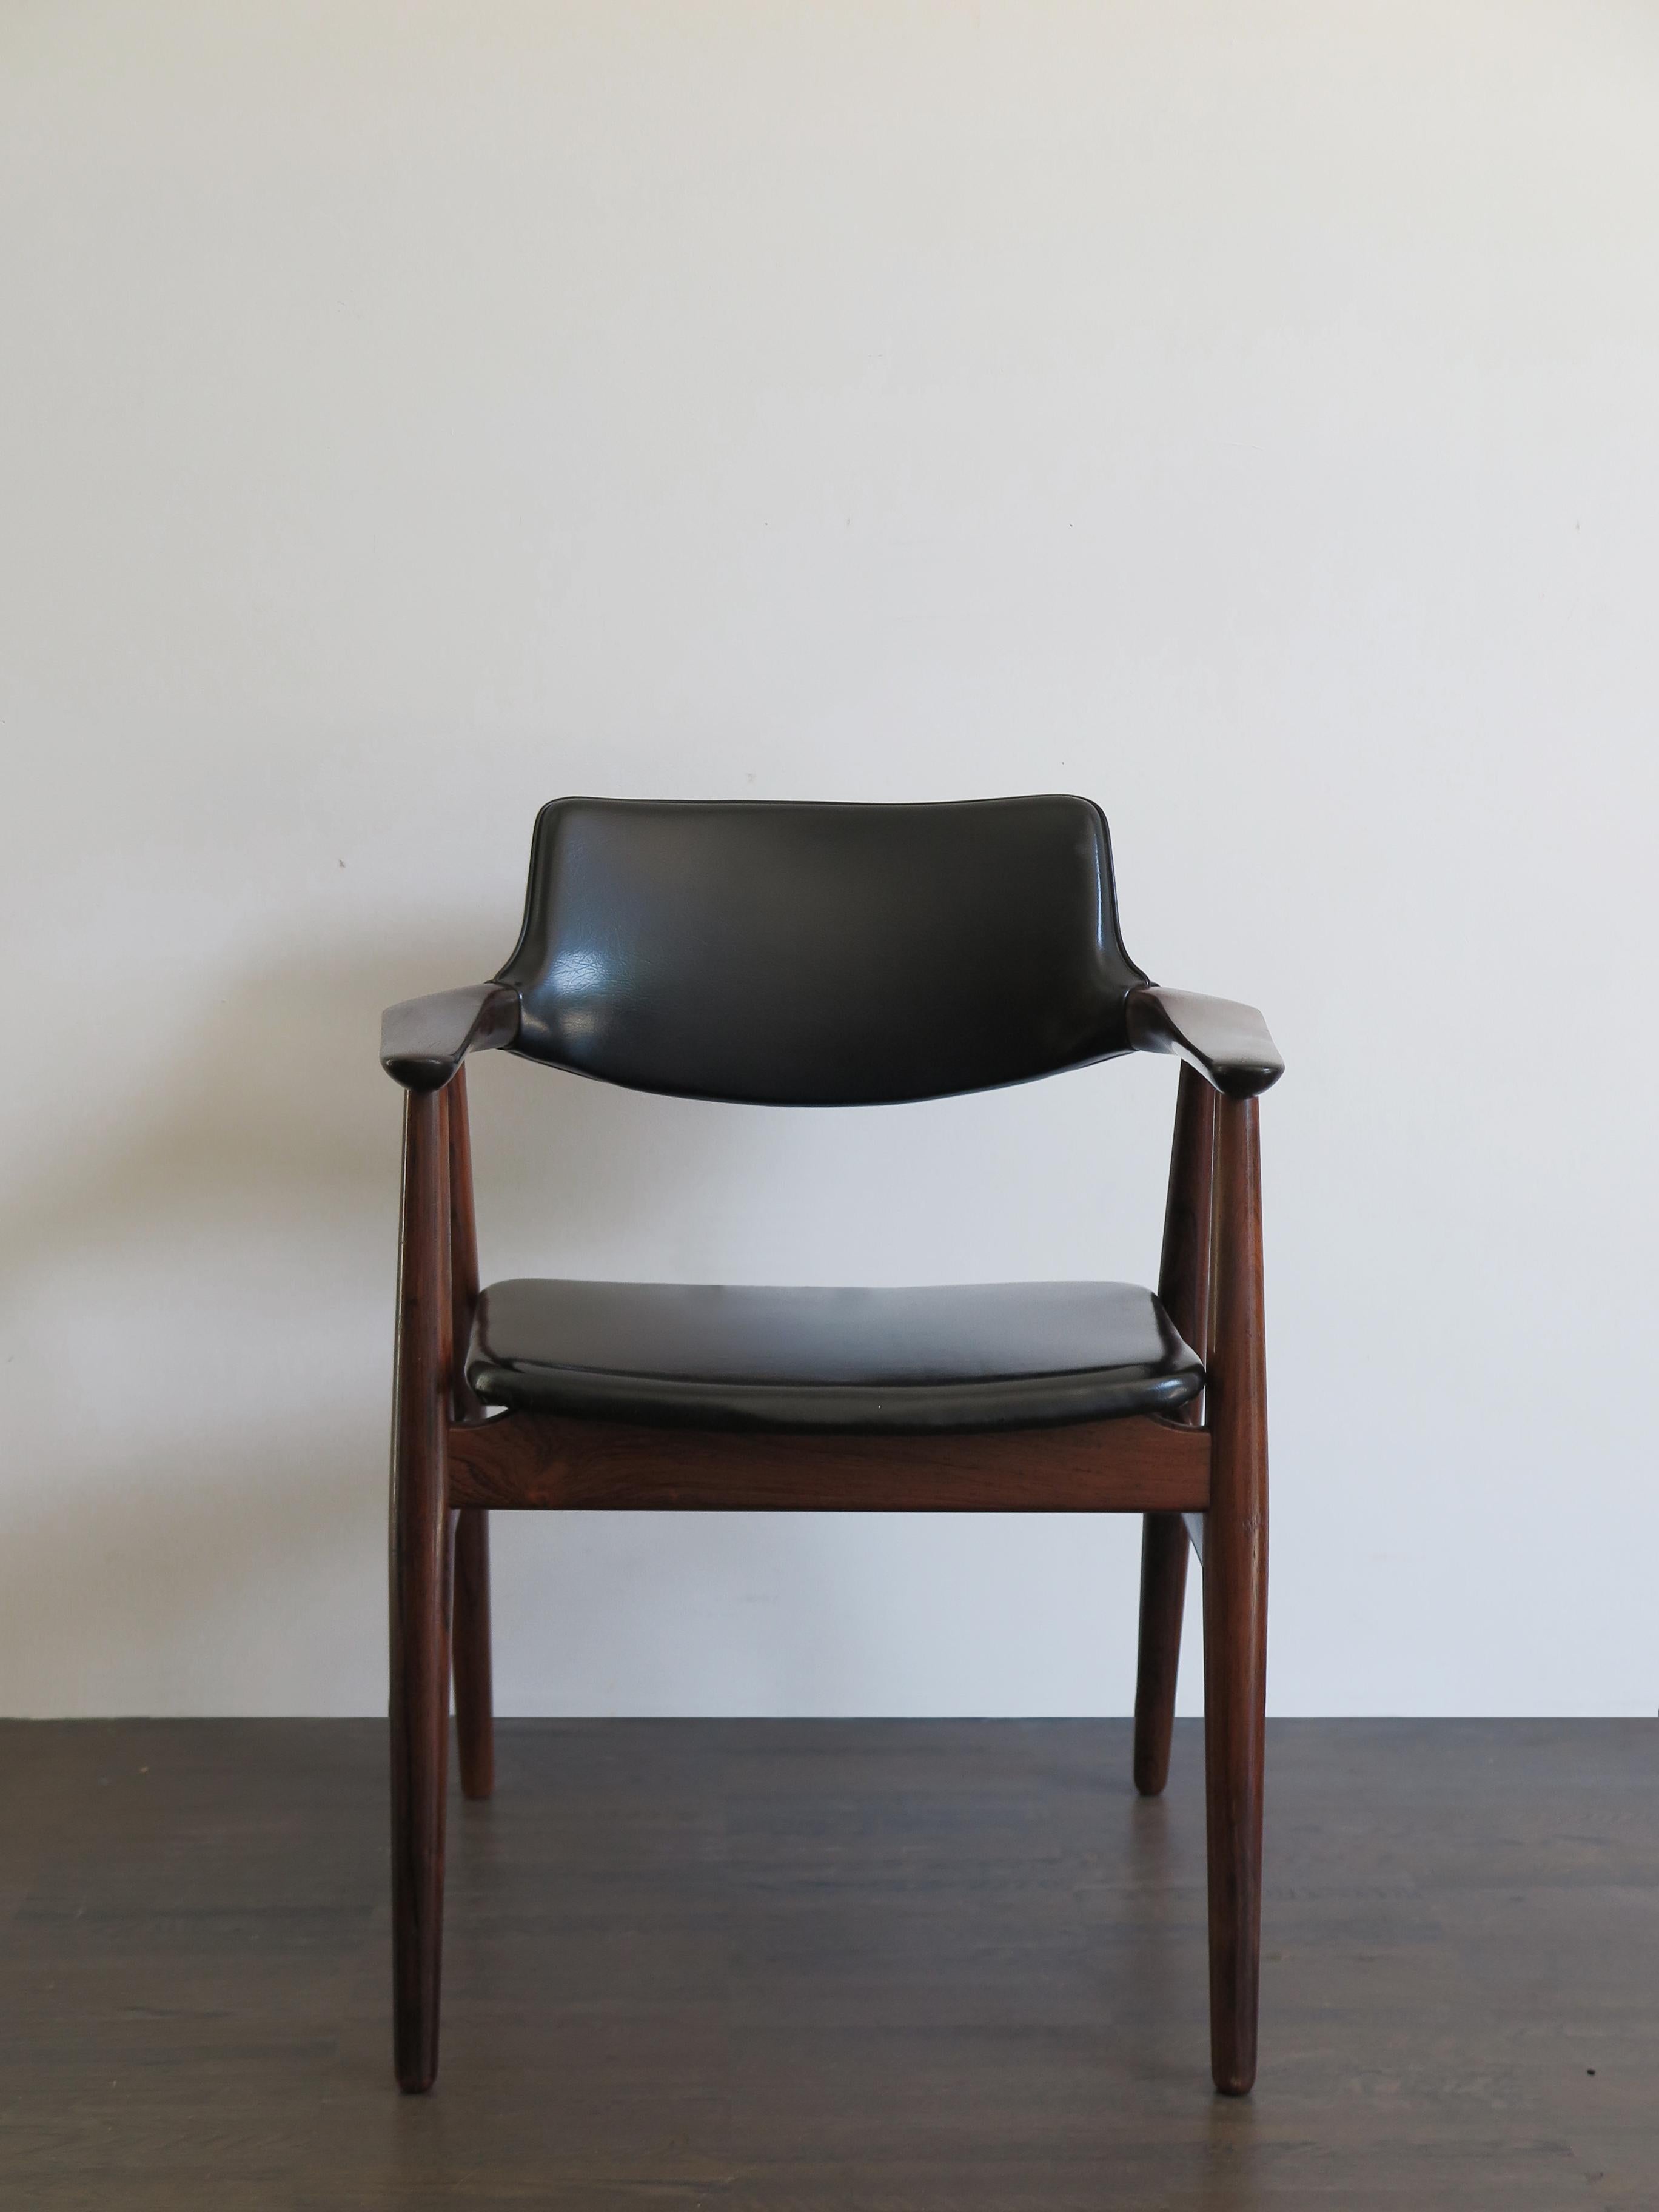 Scandinavian Mid-Century Modern design original armchair with structure in solid rosewood and original leather upholstery, Denmark 1960s

Please note that the item is original of the period and this shows normal signs of age and use.